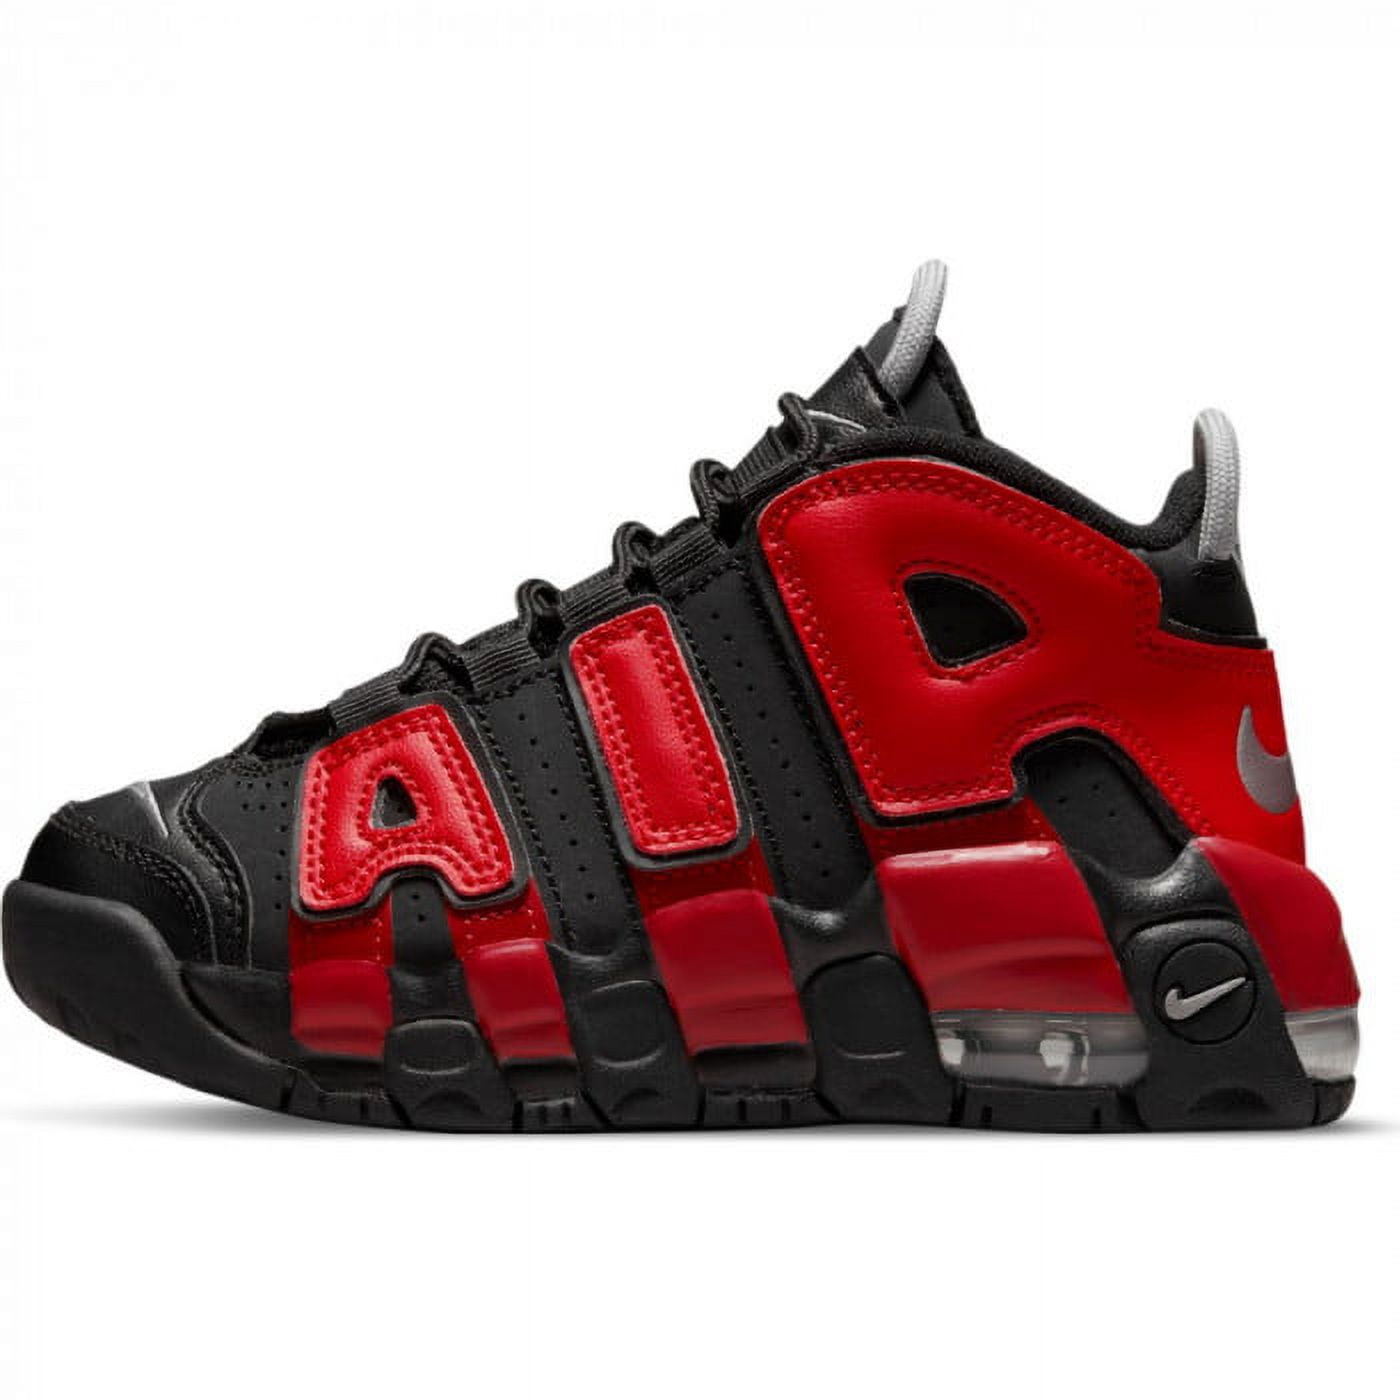 A1CustomKix - Custom “Bloody Shoes” Air more uptempos 